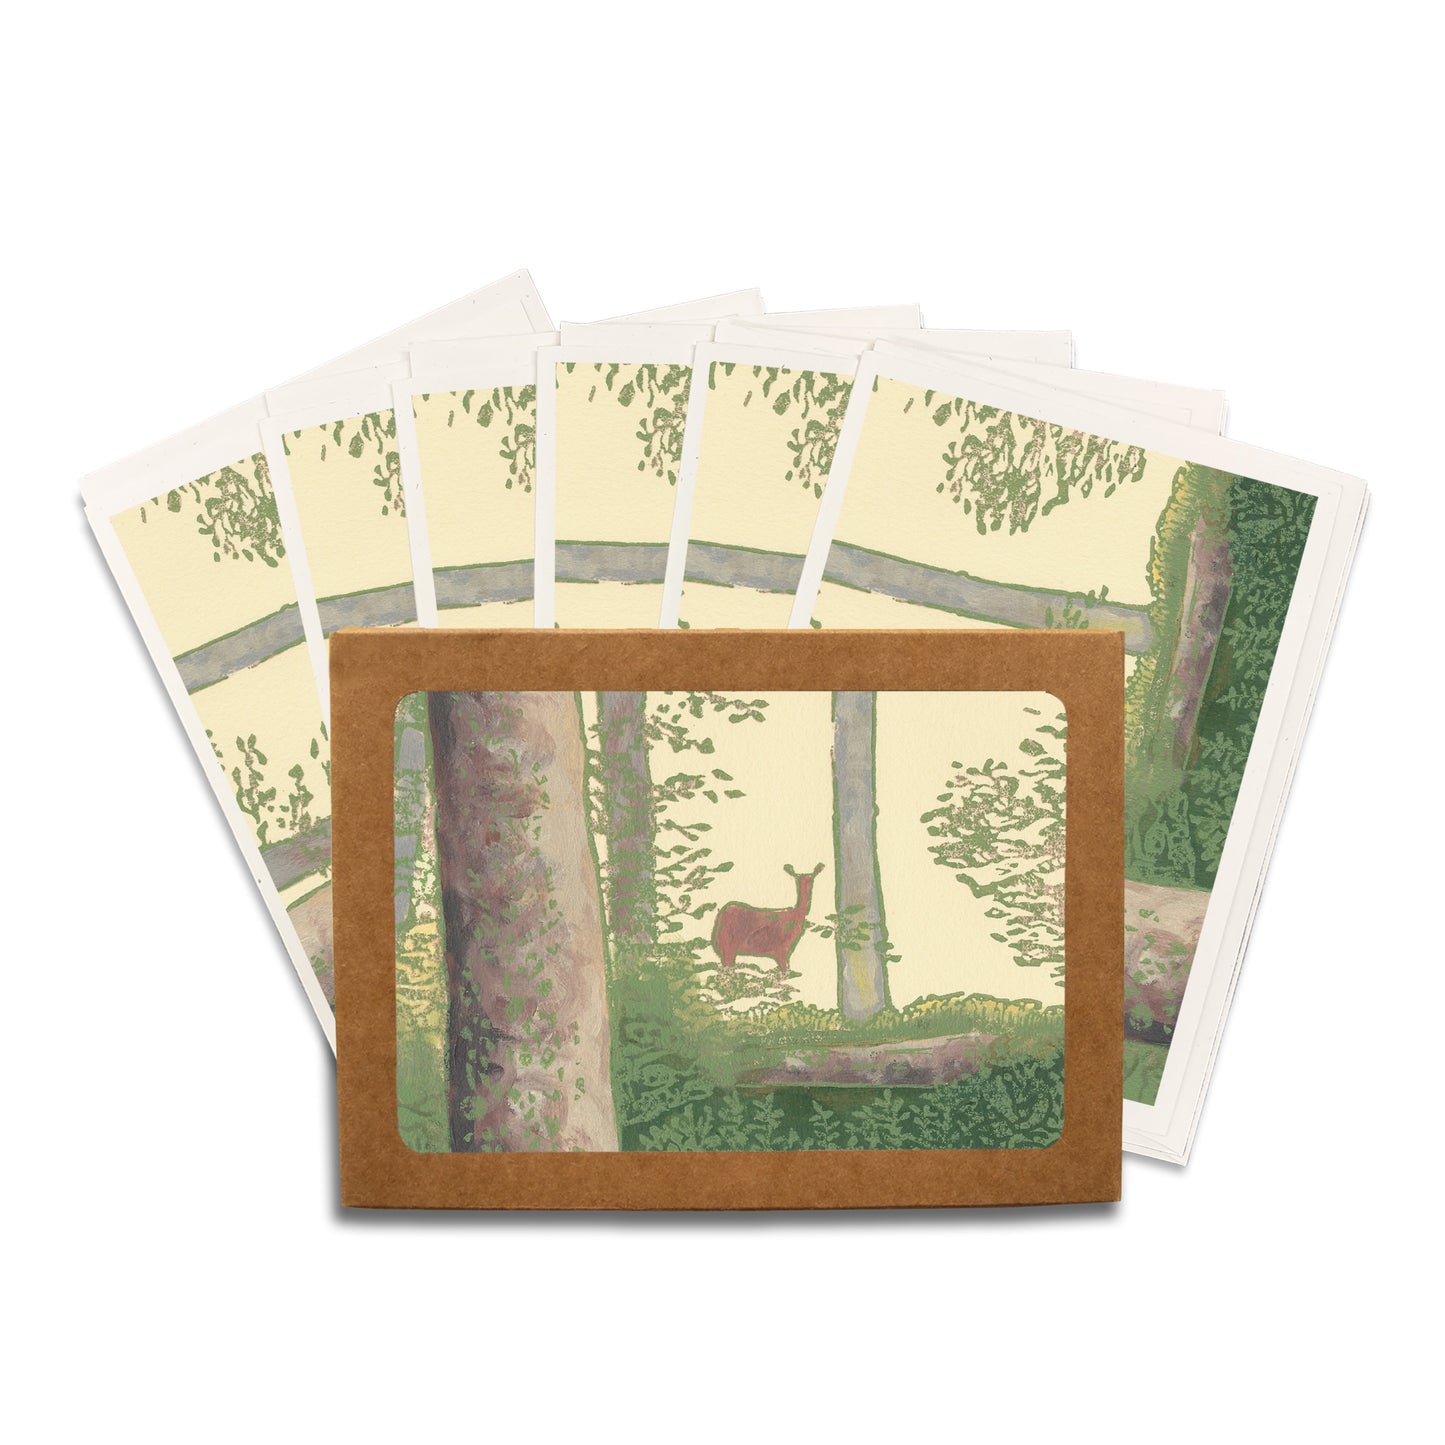 Deer in the Woods.  A casually elegant card featuring a digital reproduction of a block print design with the same title by Natalia Wohletz of Peninsula Prints, Milford and Mackinac Island, Michigan.